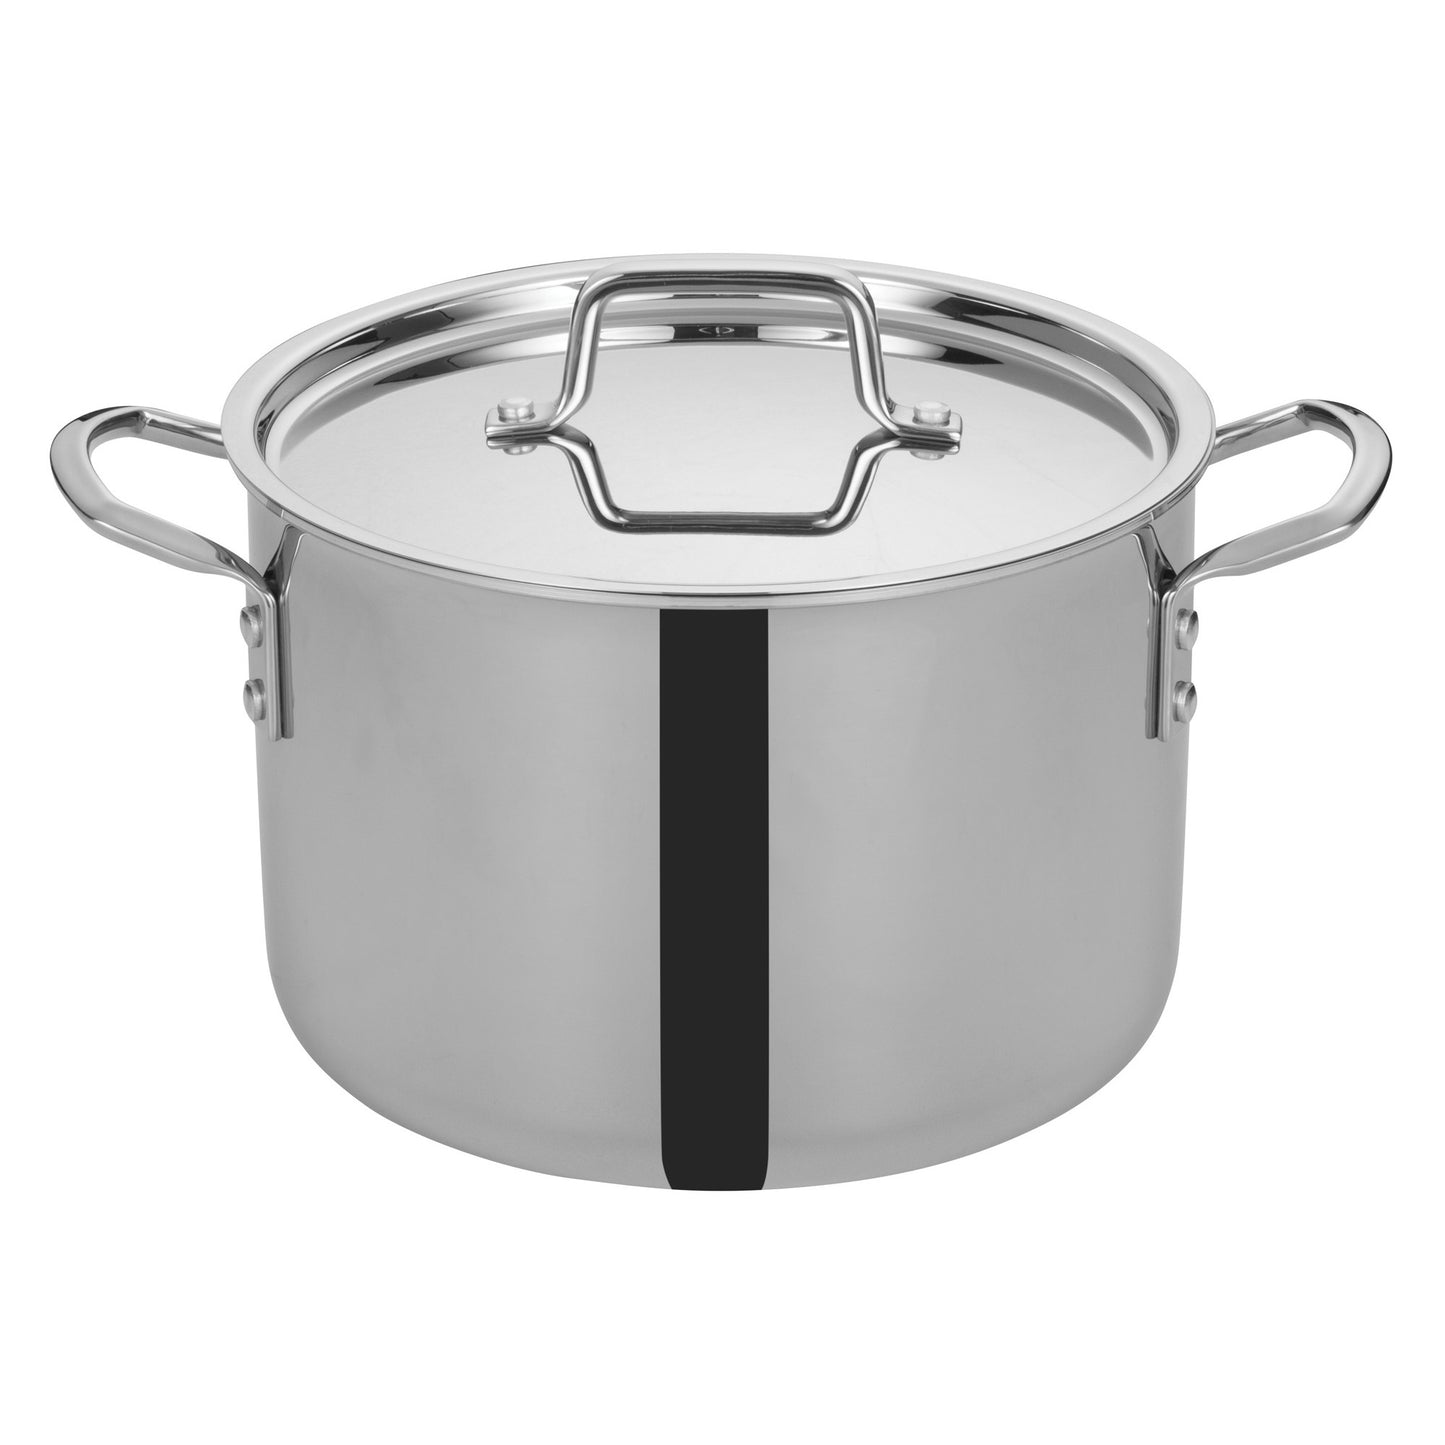 Tri-Gen Tri-Ply Stainless Steel Stock Pot with Cover - 8 Quart